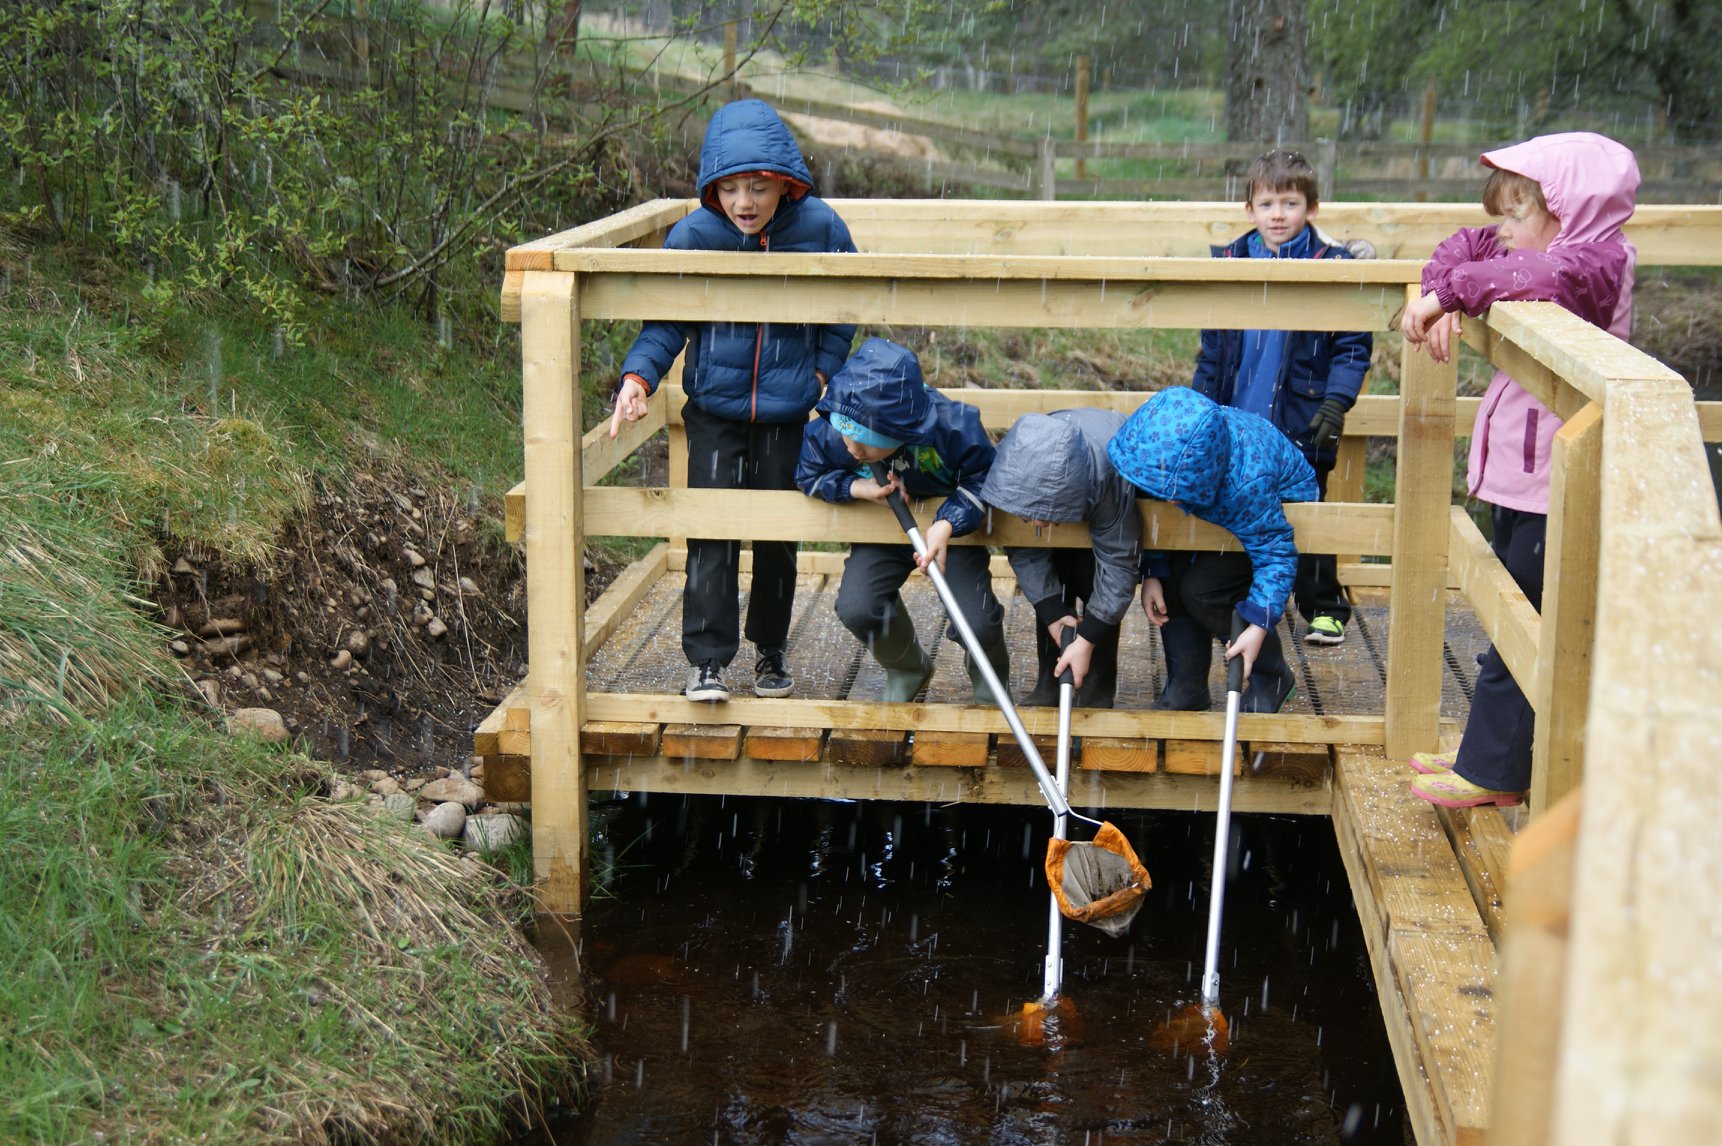 Pond dipping from the new platform at Abernethy school, Nethy Bridge.